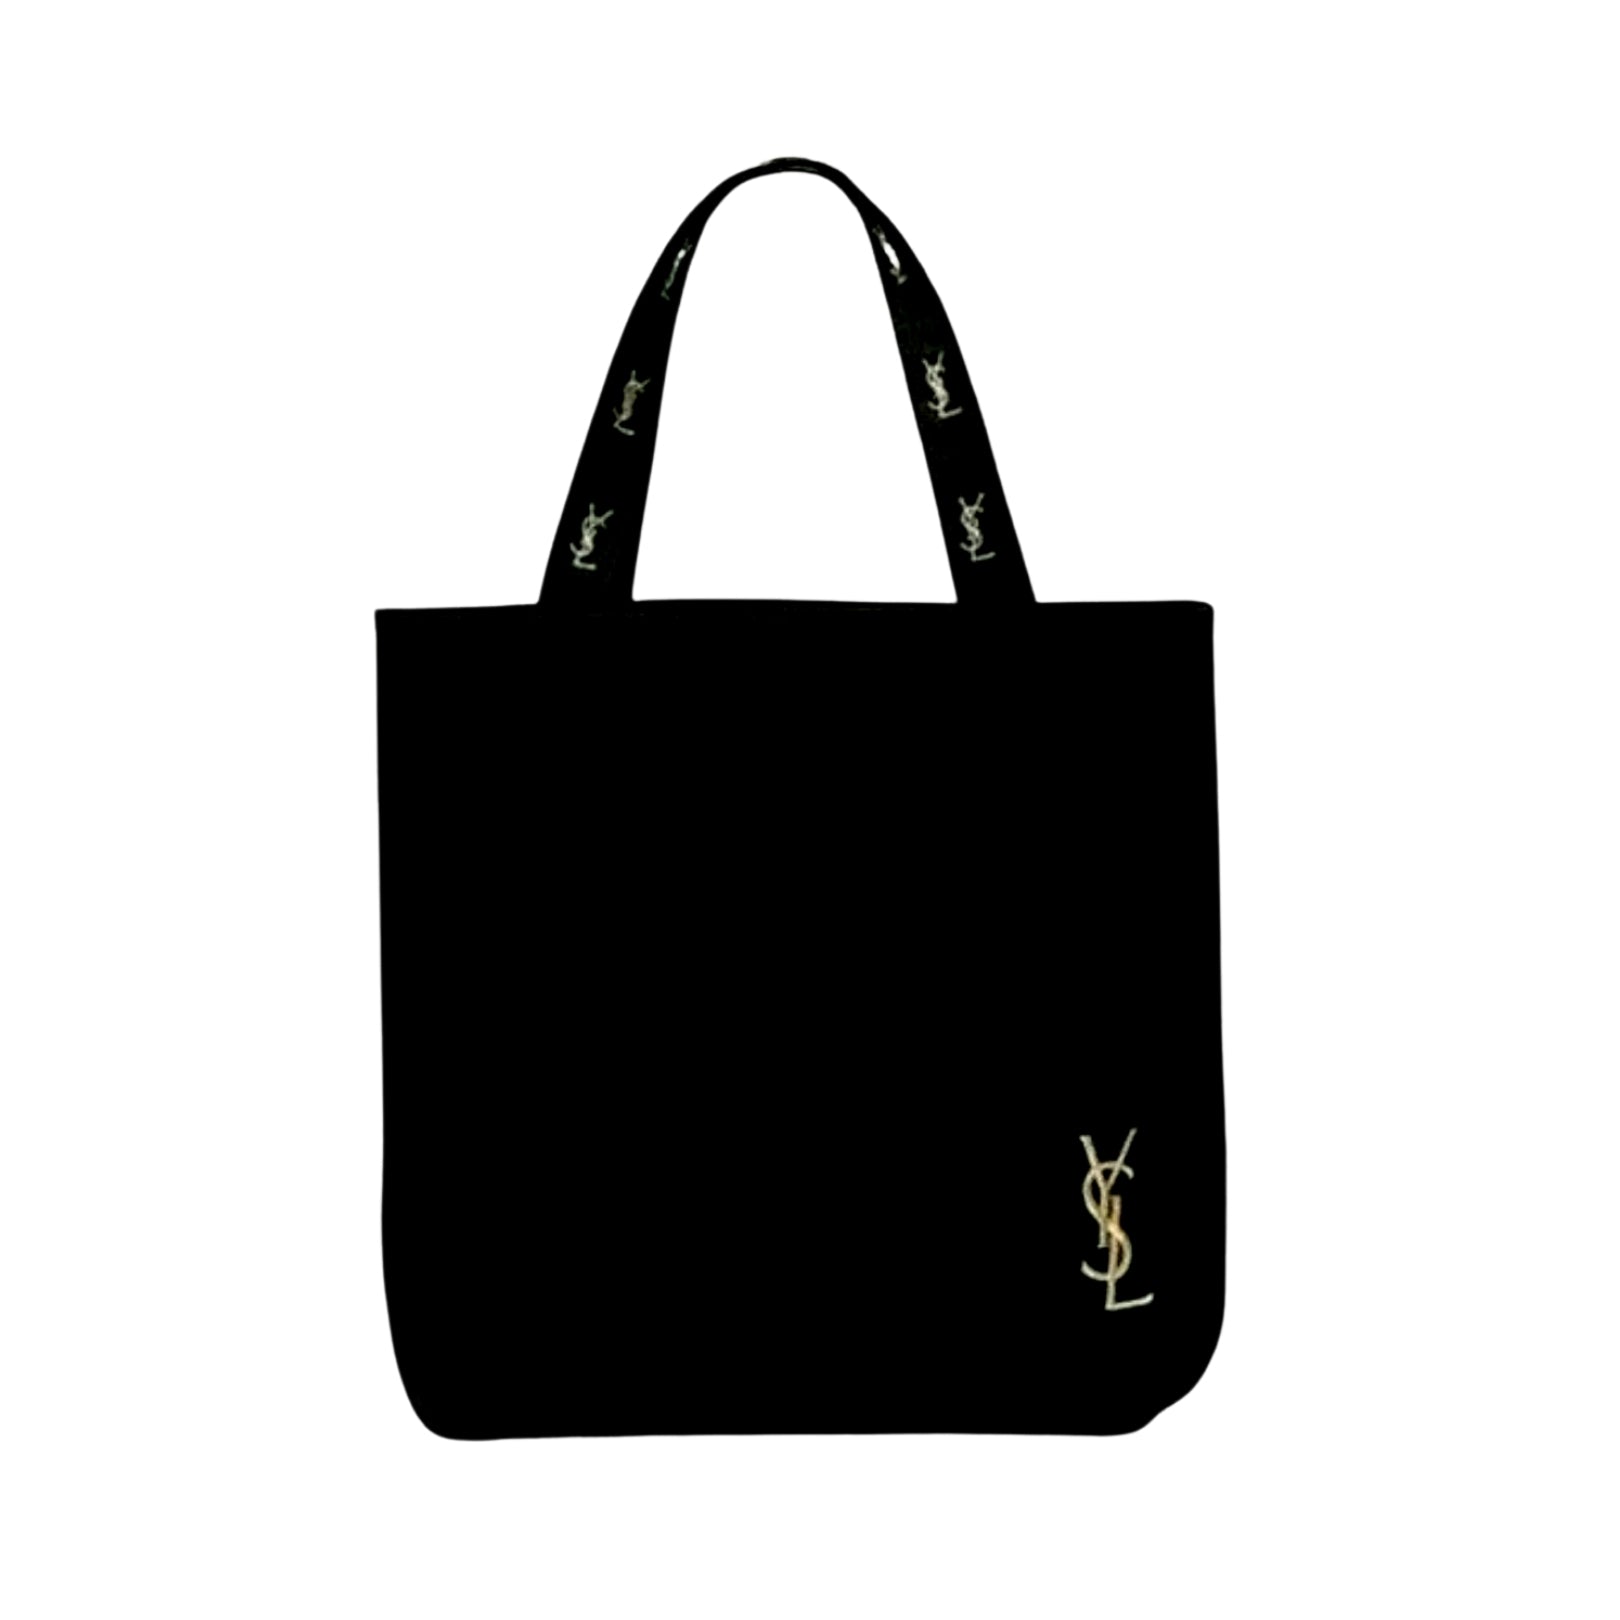 Did You Get Your Free YSL Cotton Tote Bags? 